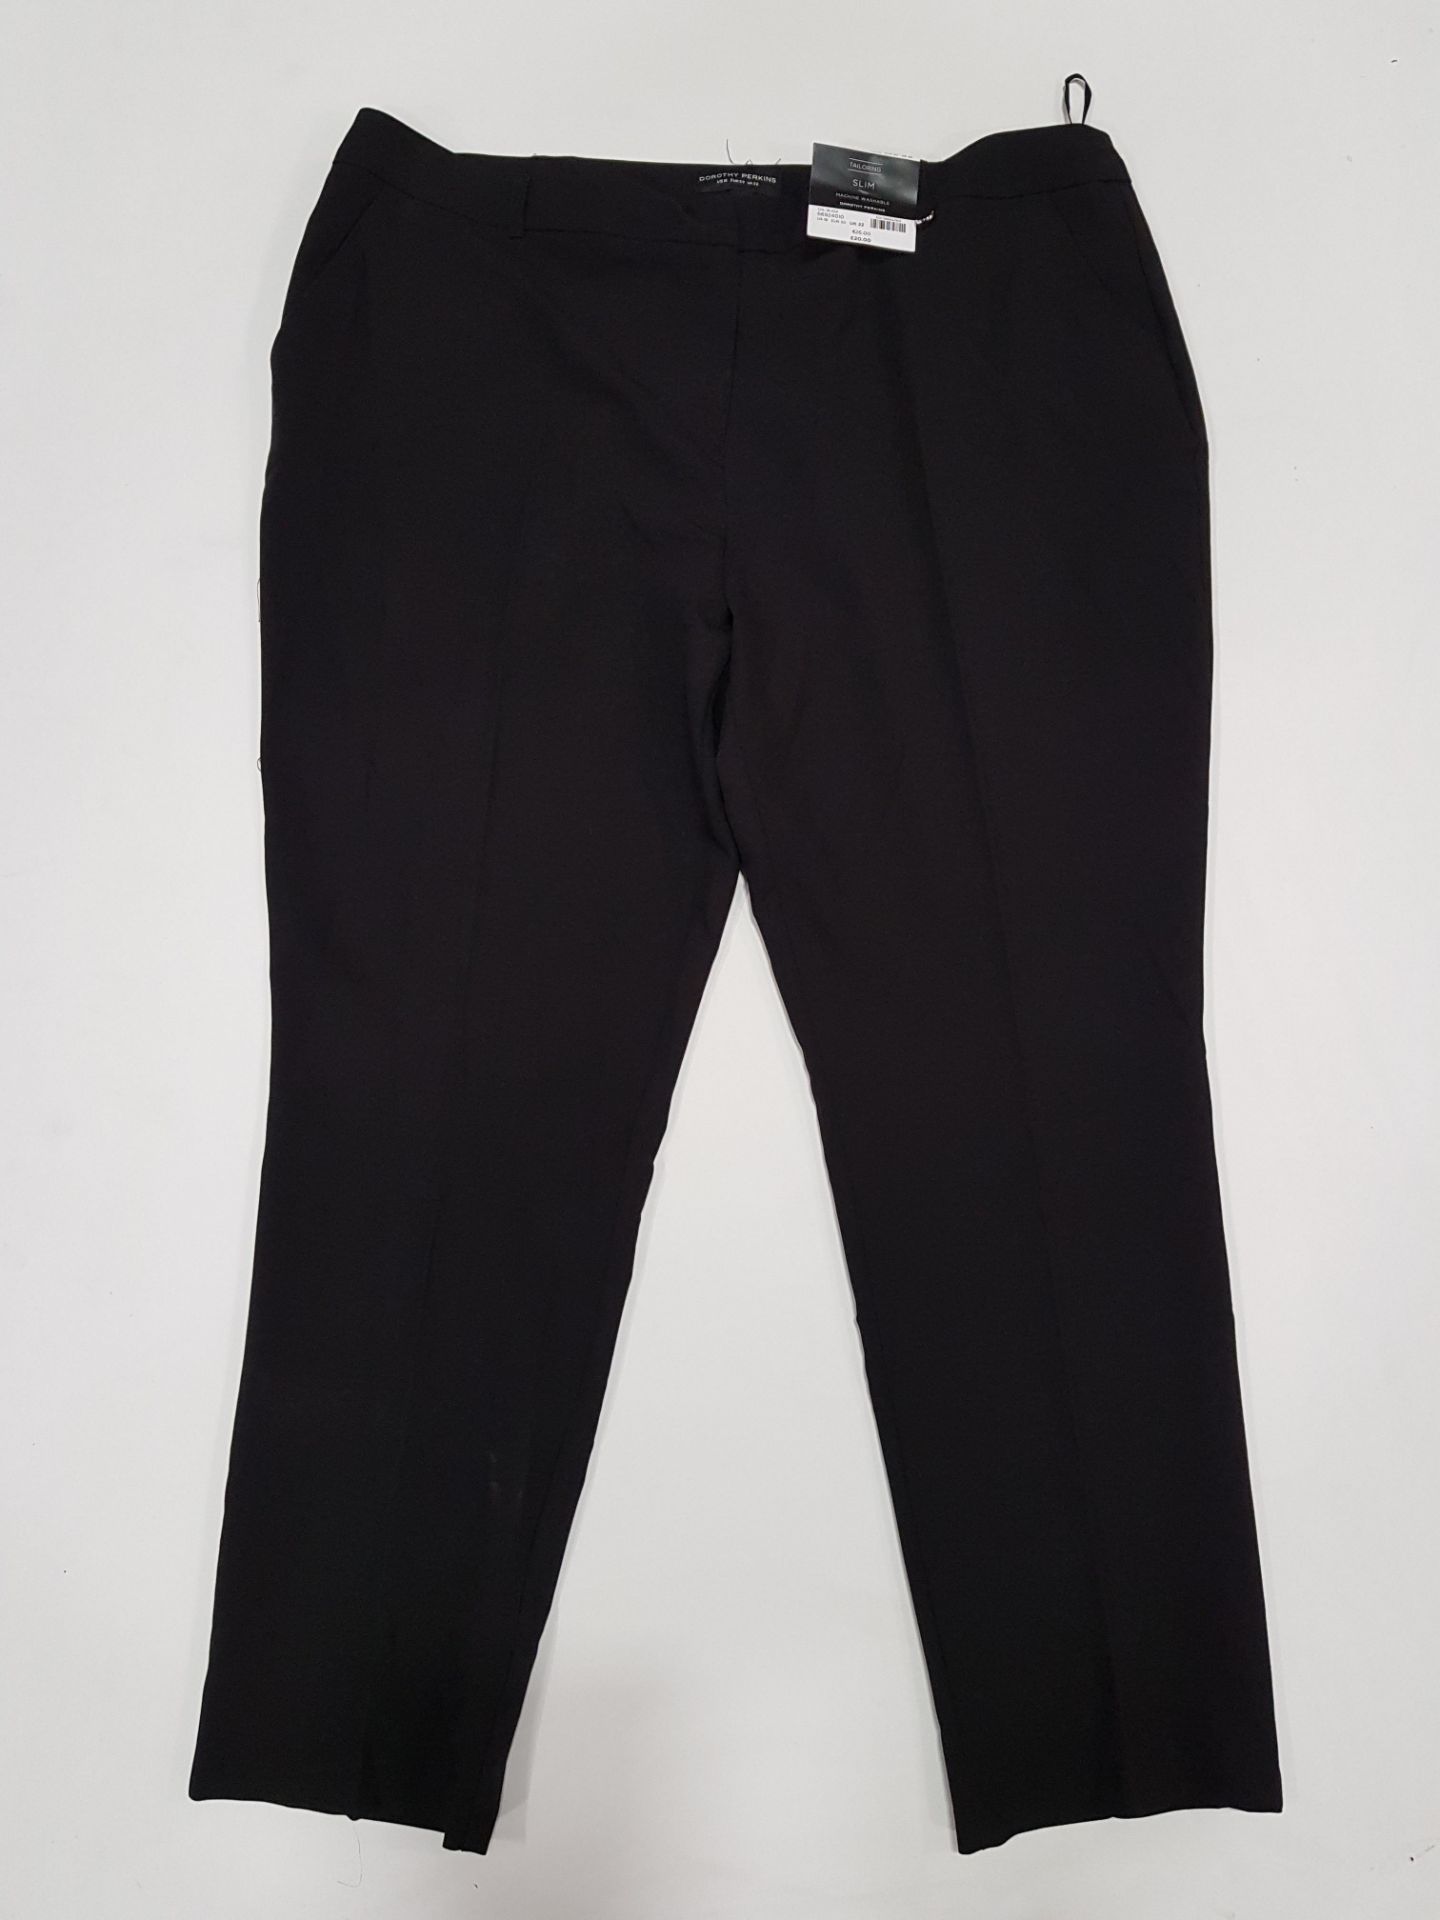 15 X BRAND NEW DOROTHY PERKINS SLIM MACHINE WASHABLE TROUSERS UK SIZE 14 RRP £20.00 (TOTAL RRP £